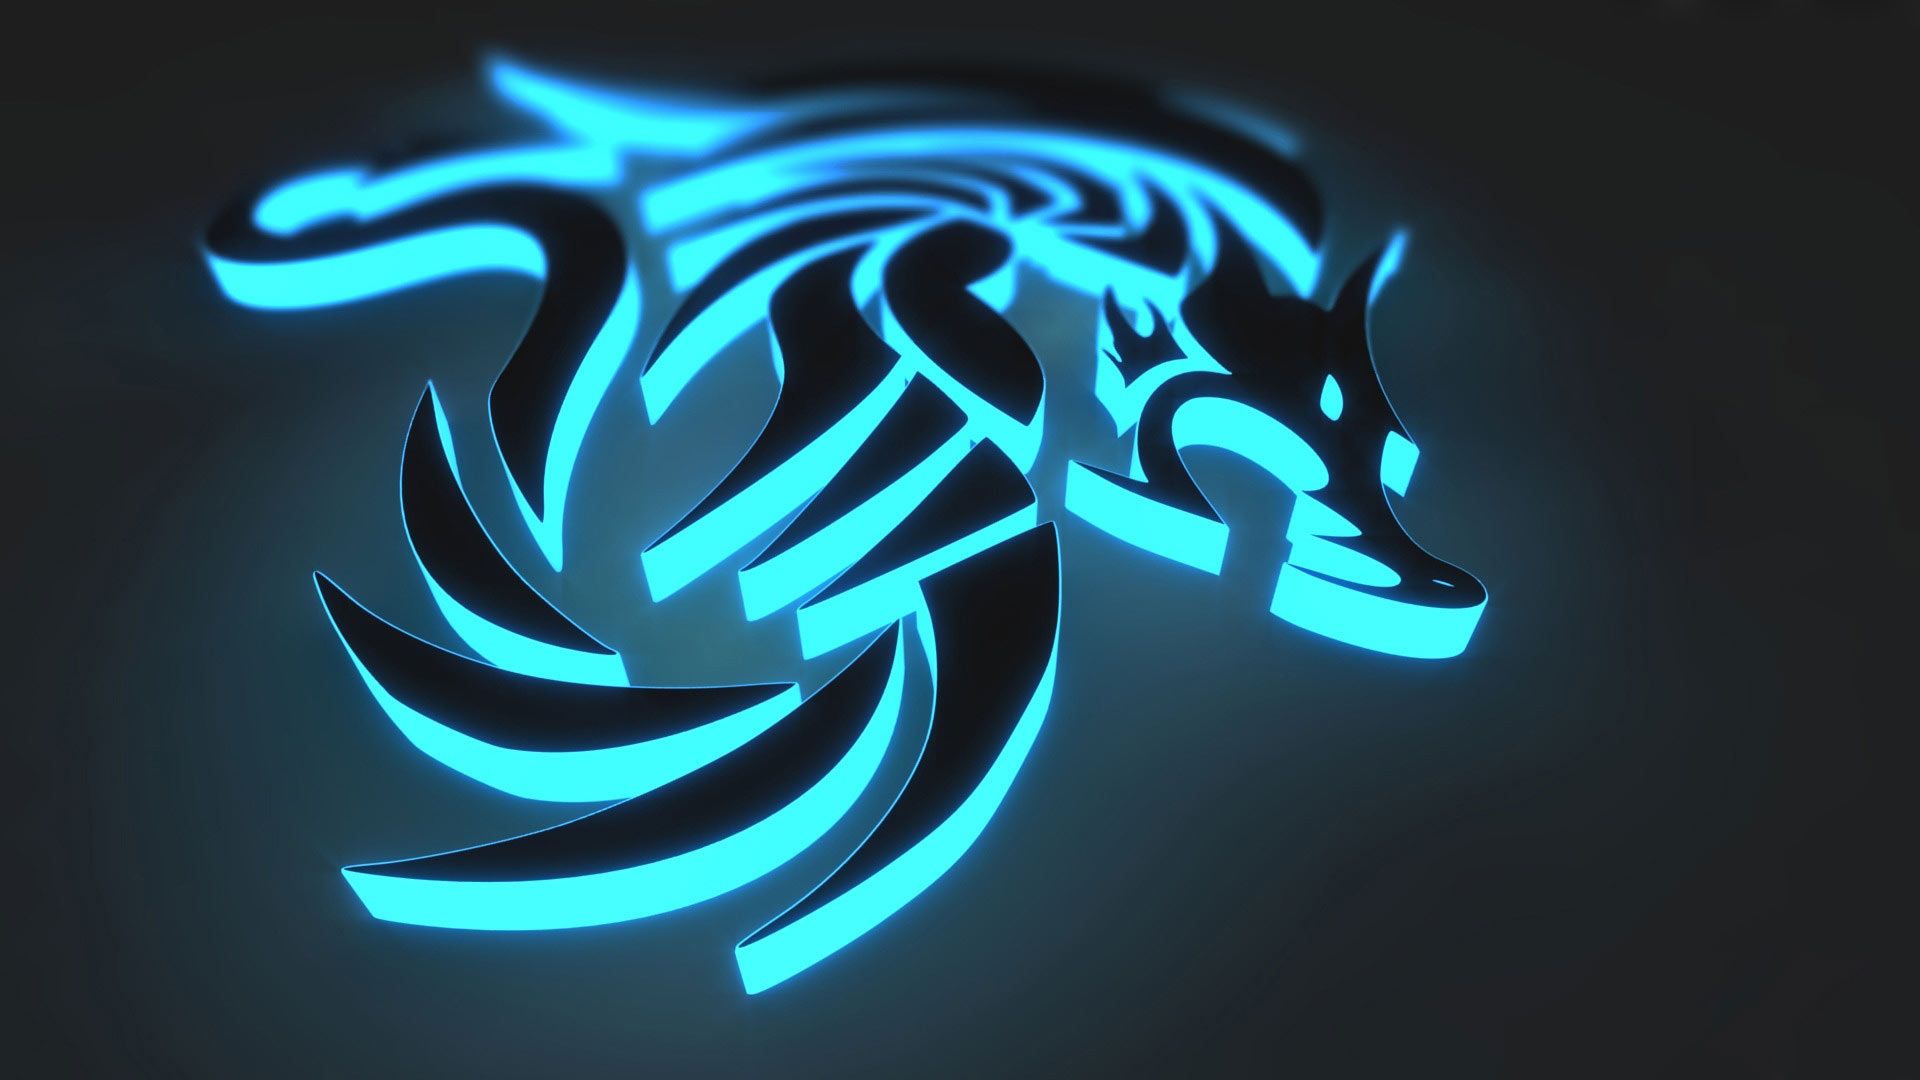 3D Dragon Neon Epic Wallpaper HD With images Dragon tattoo